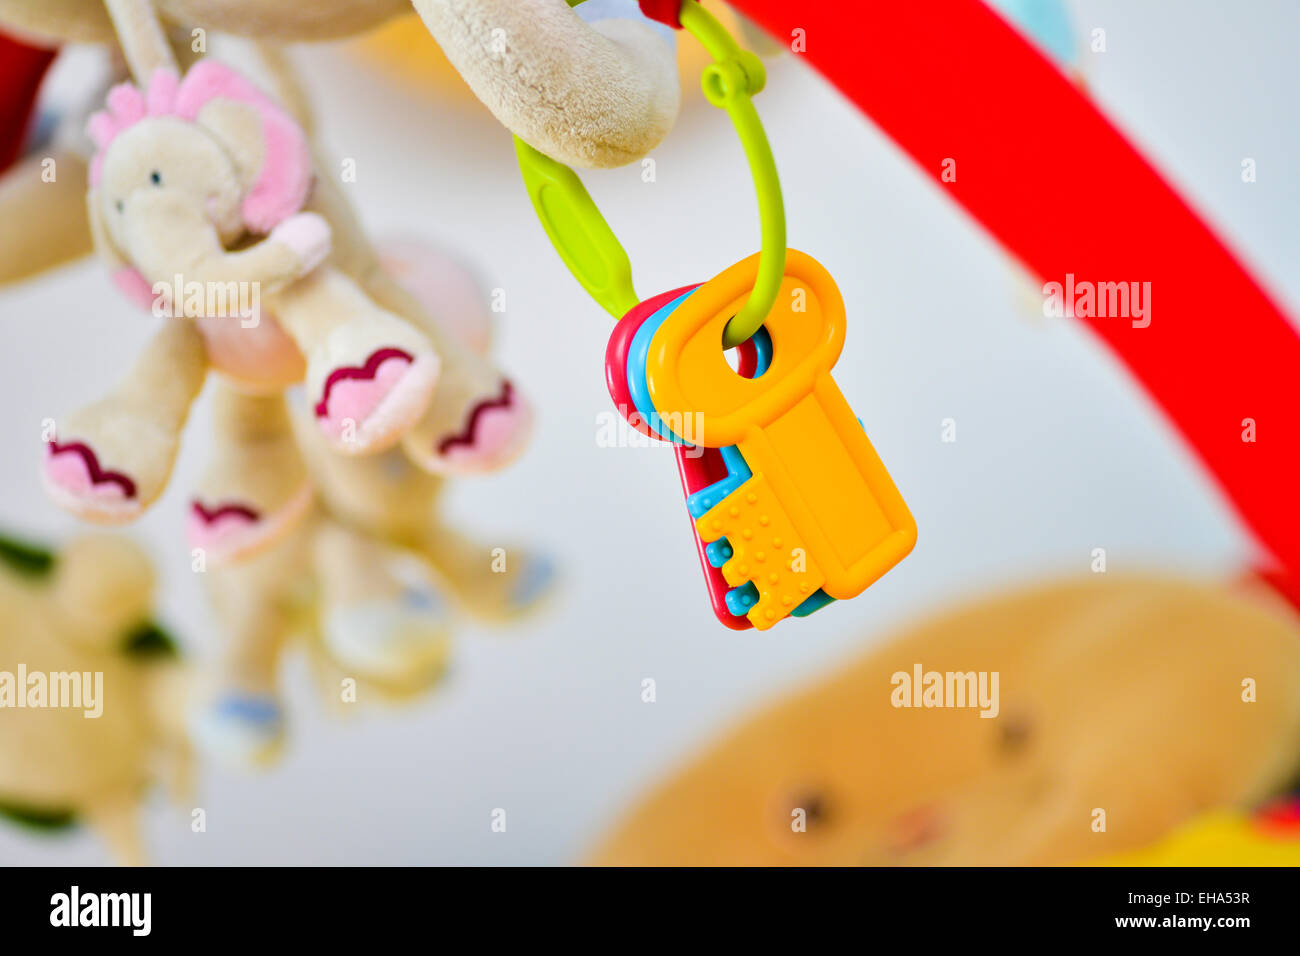 Plastic key for a newborn in a colorful background Stock Photo